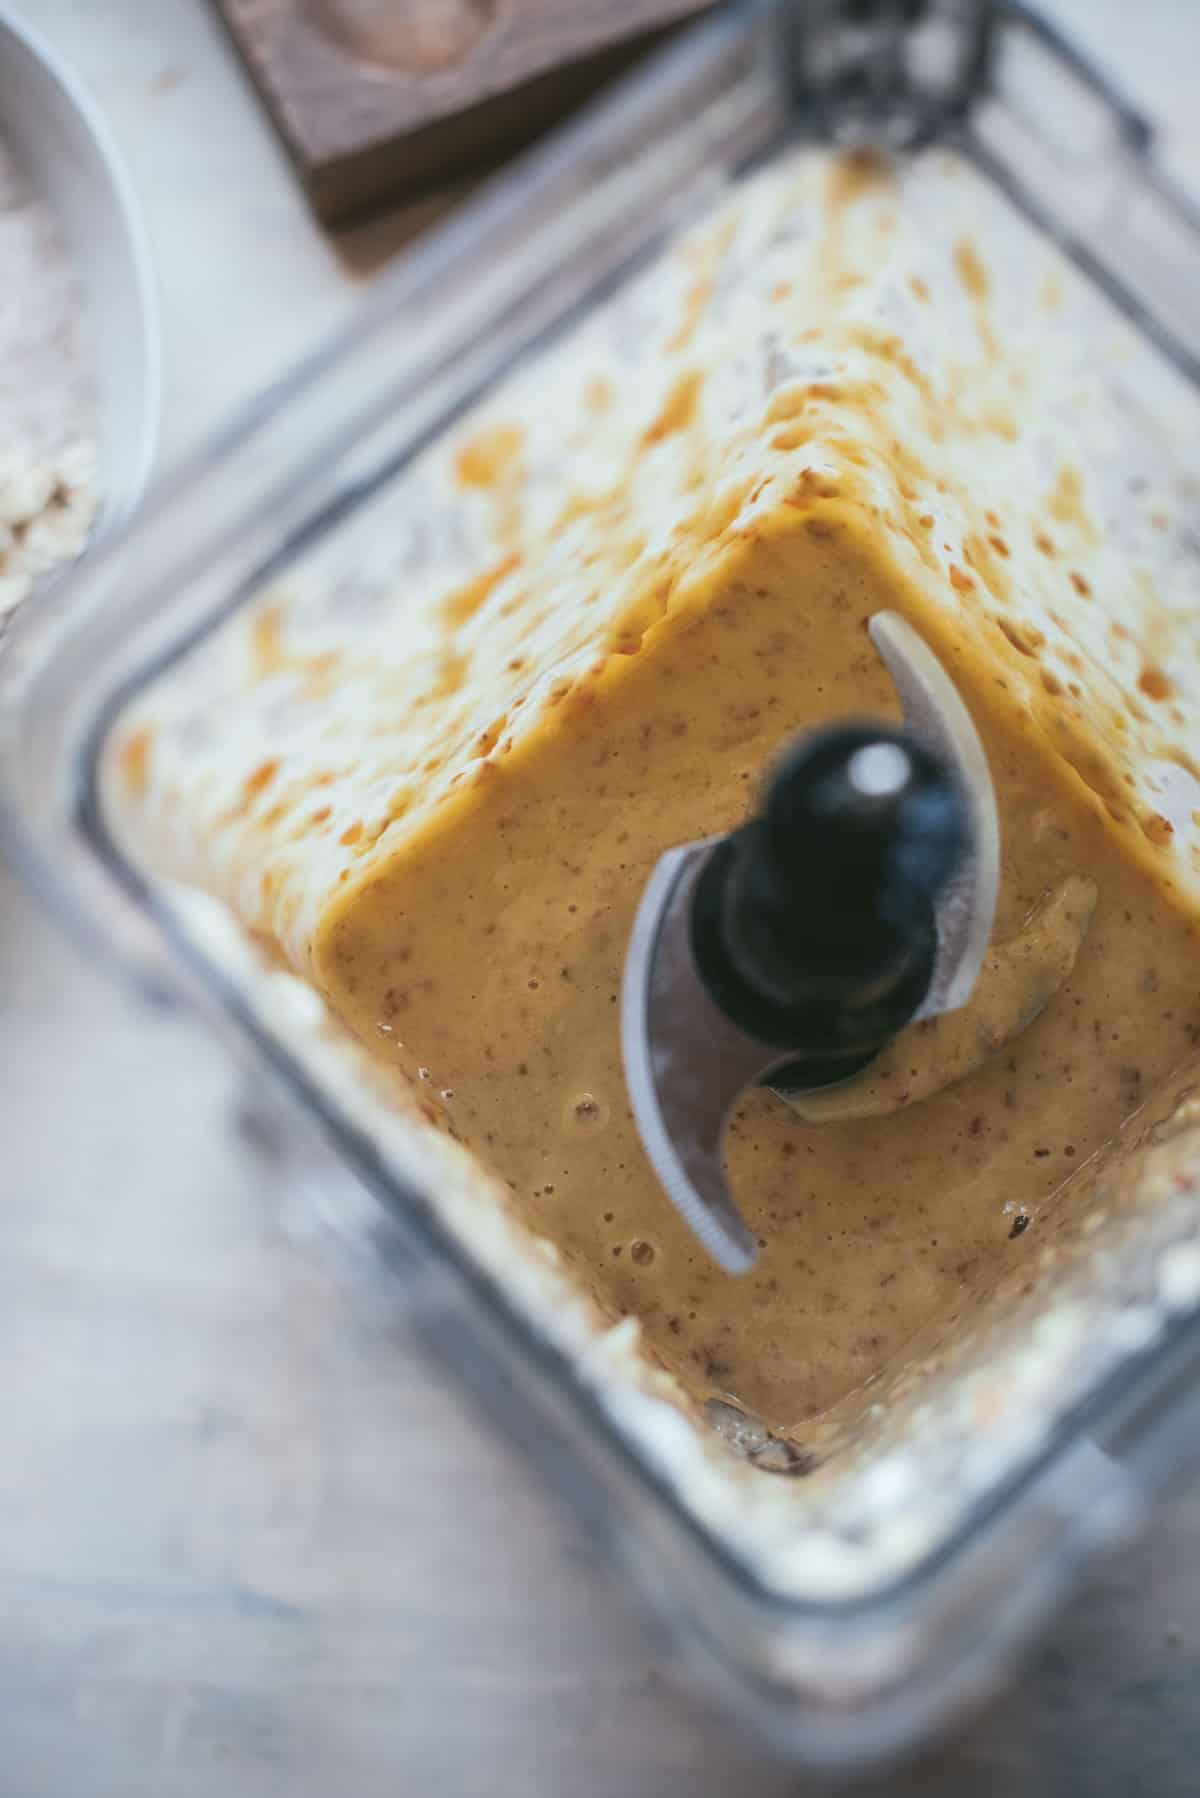 Looking through the top of a blender with no lid, you can seea blended cream color batter.